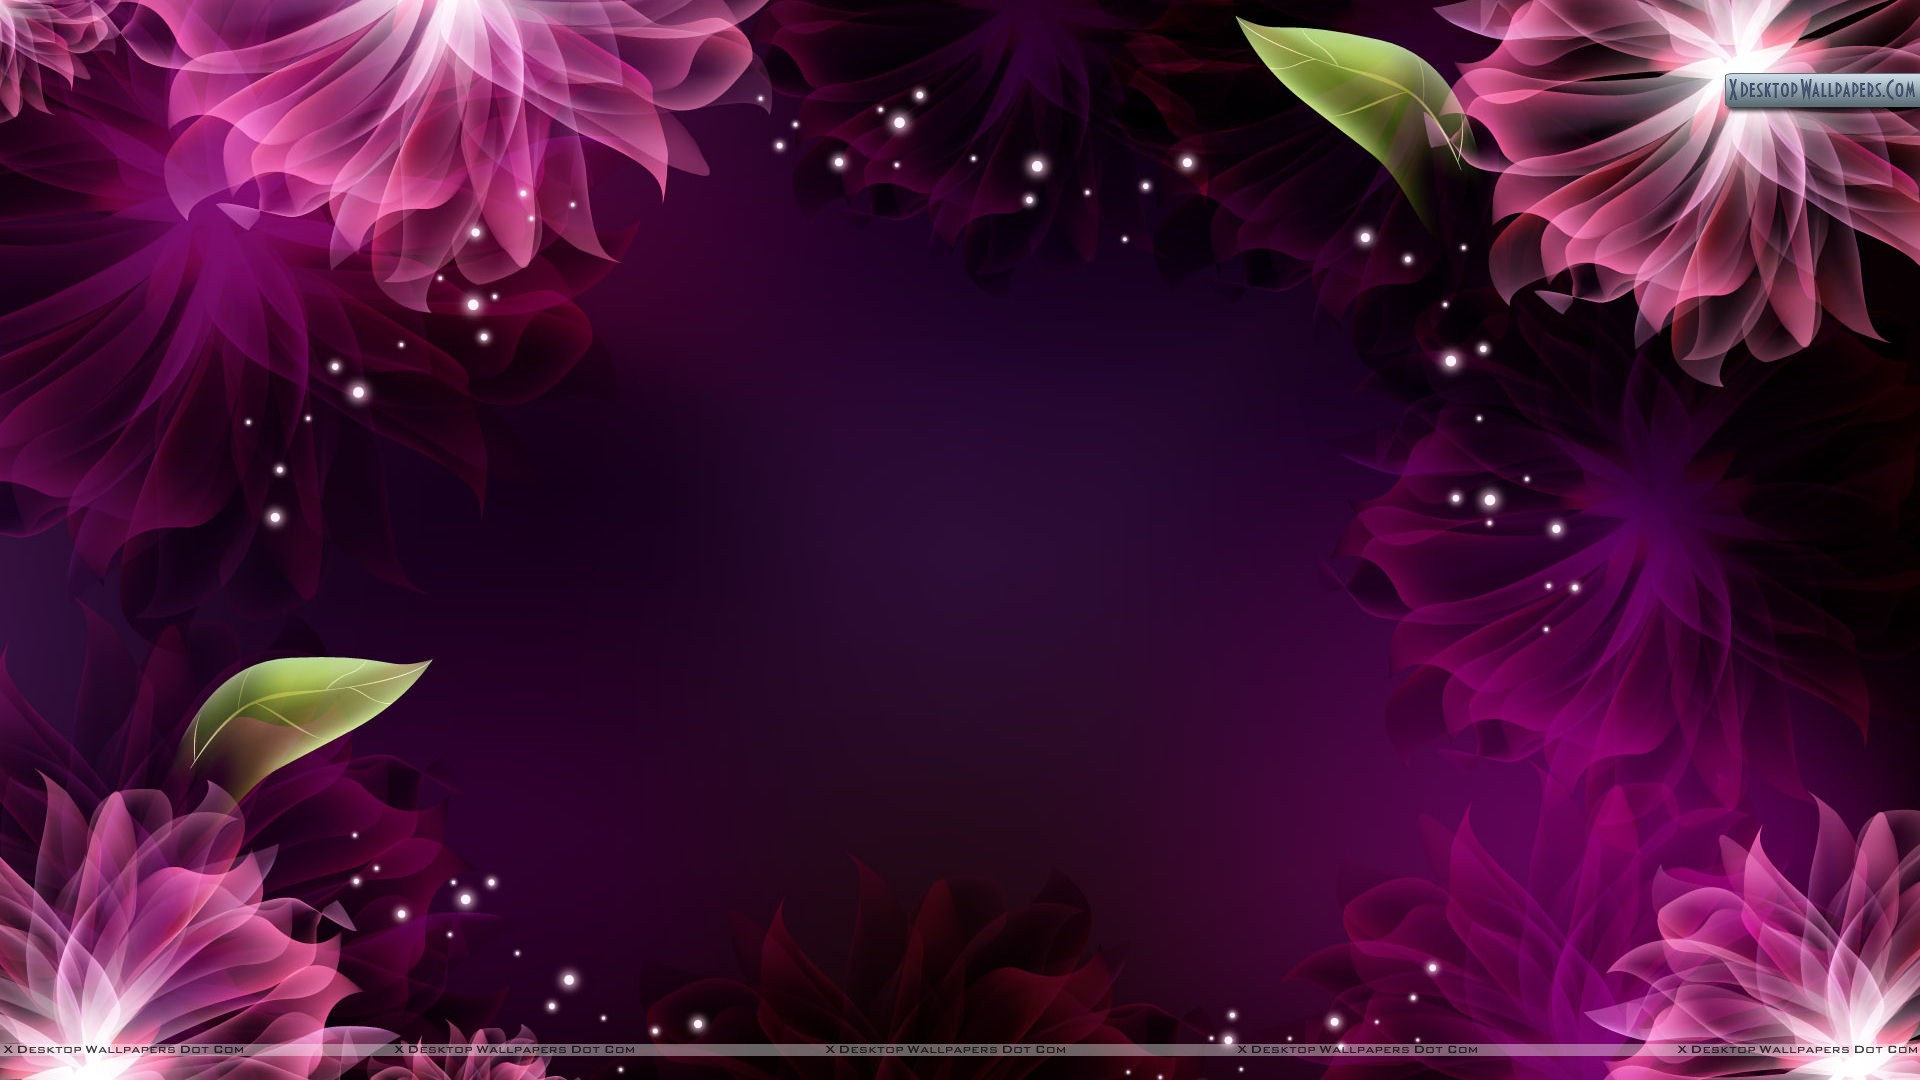 Abstract Flower Backgrounds Hd Wallpaper Background   HD Wallpapers